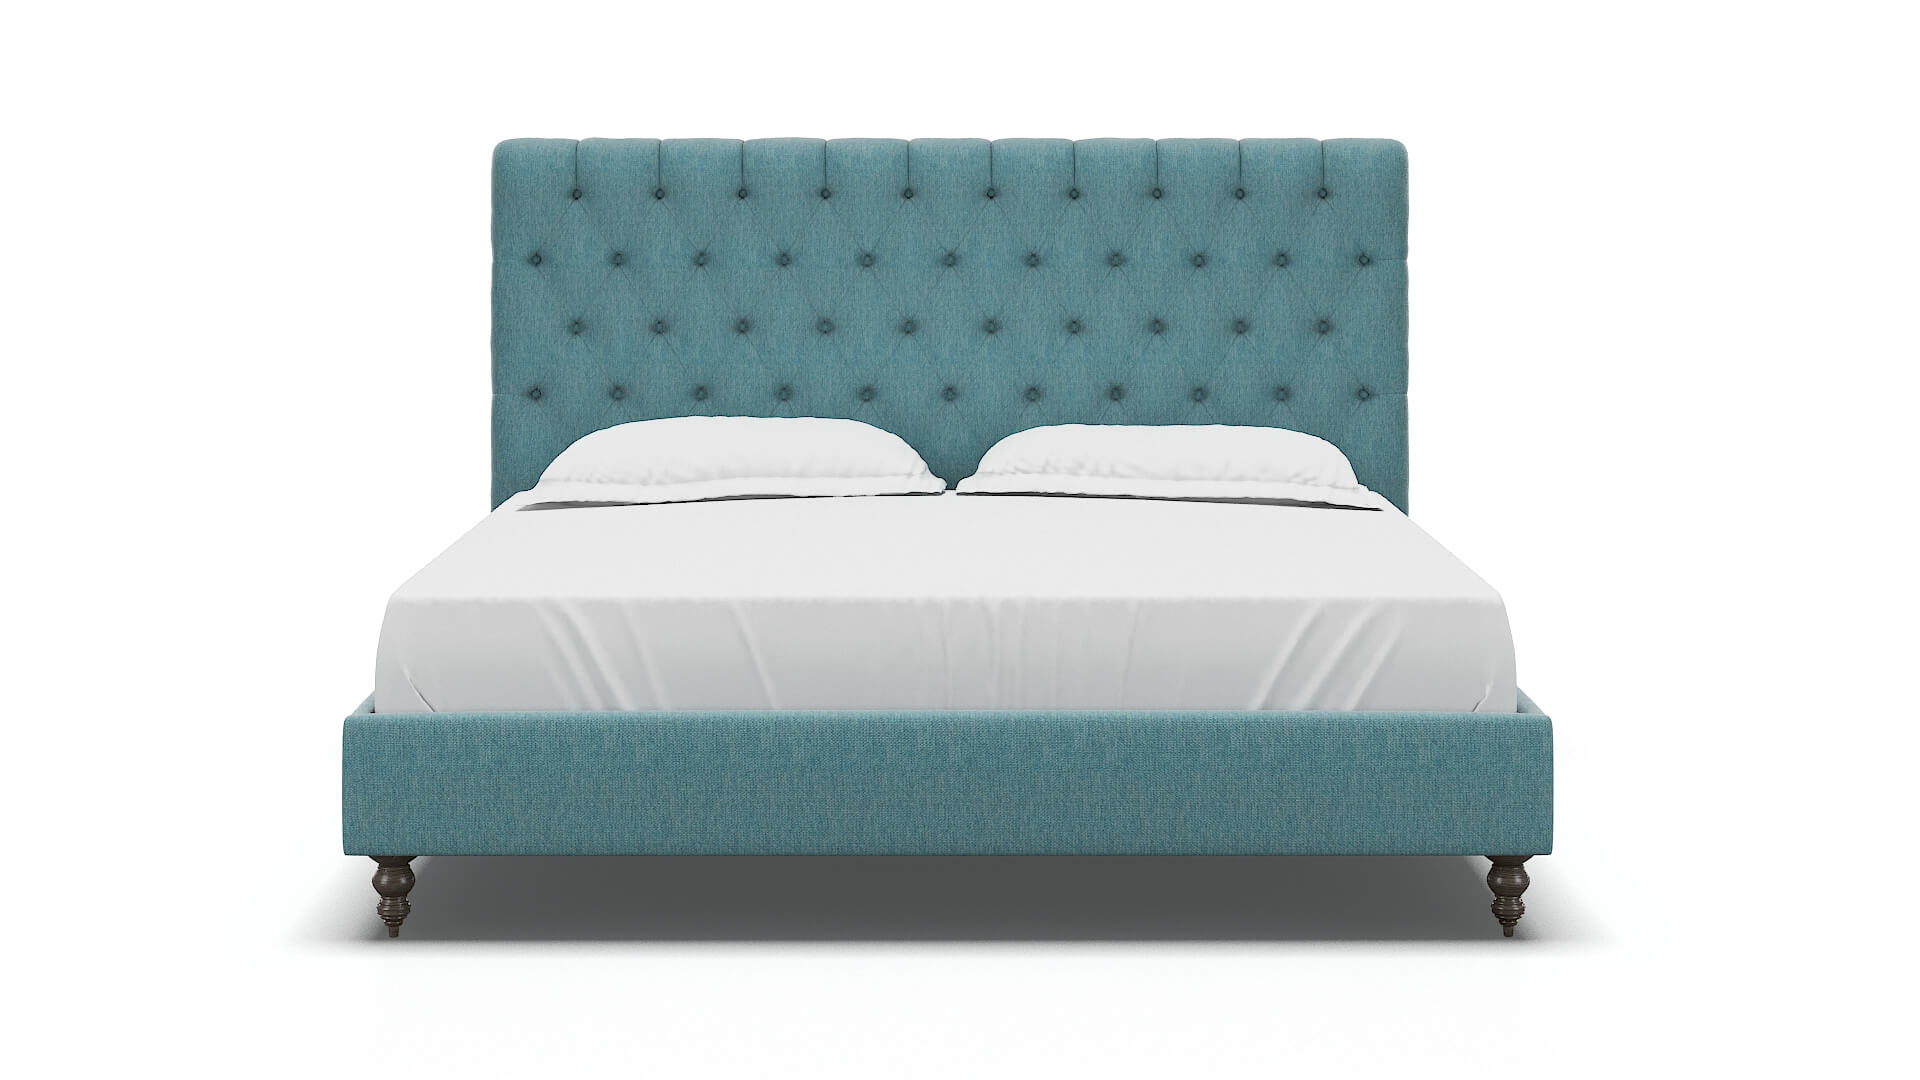 Remy Lana Peacock Bed King espresso legs 1